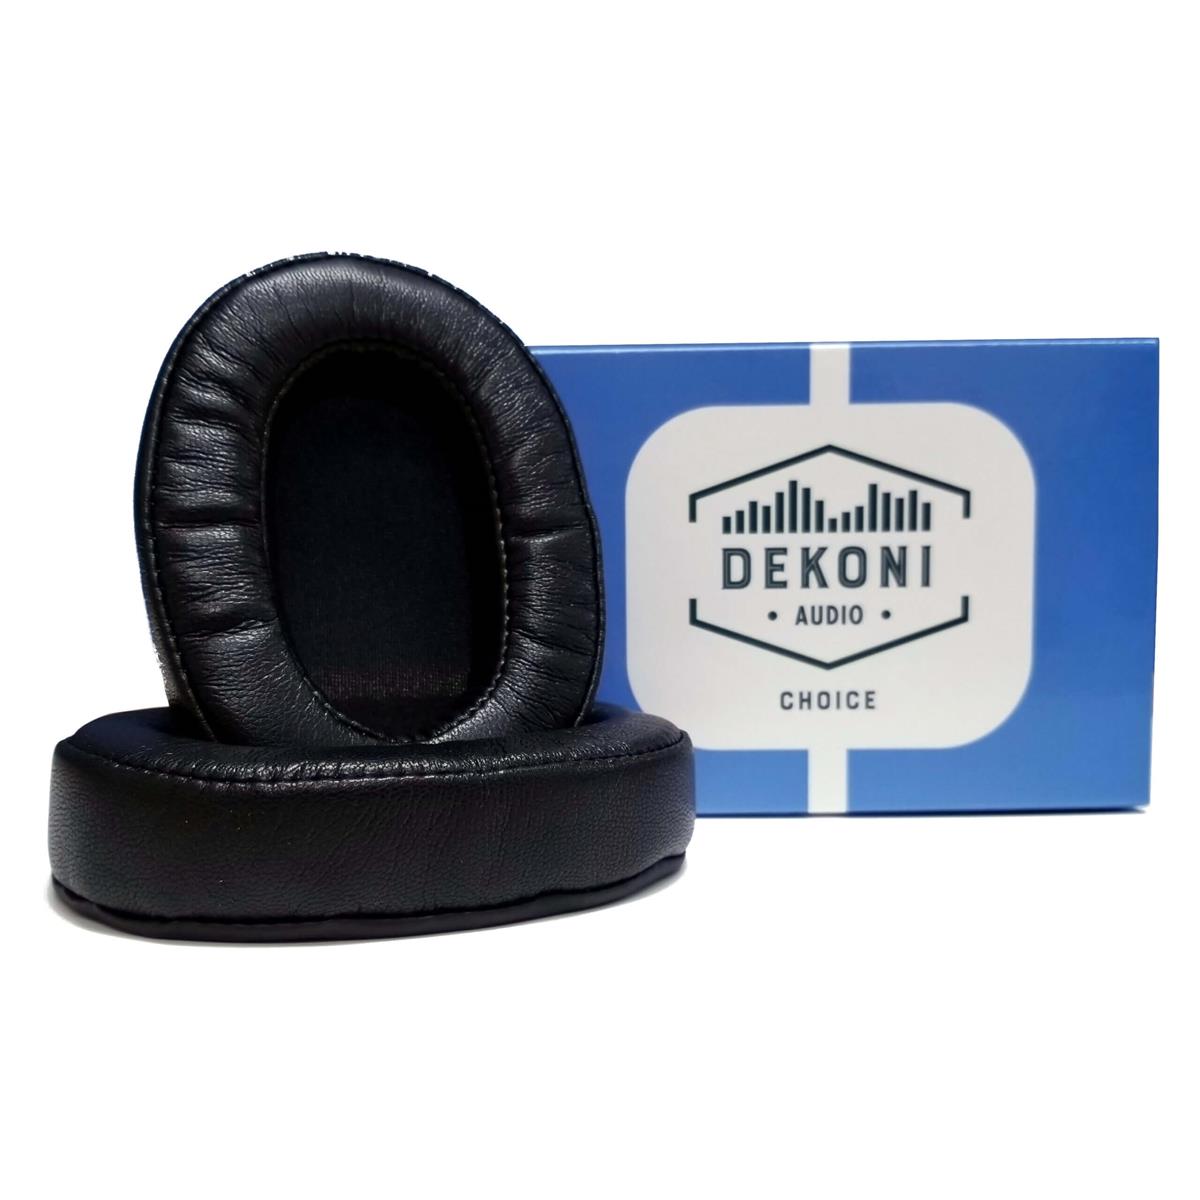 Image of Dekoni Audio Choice Leather Replacement Ear Pads for AKG K371 Headphones